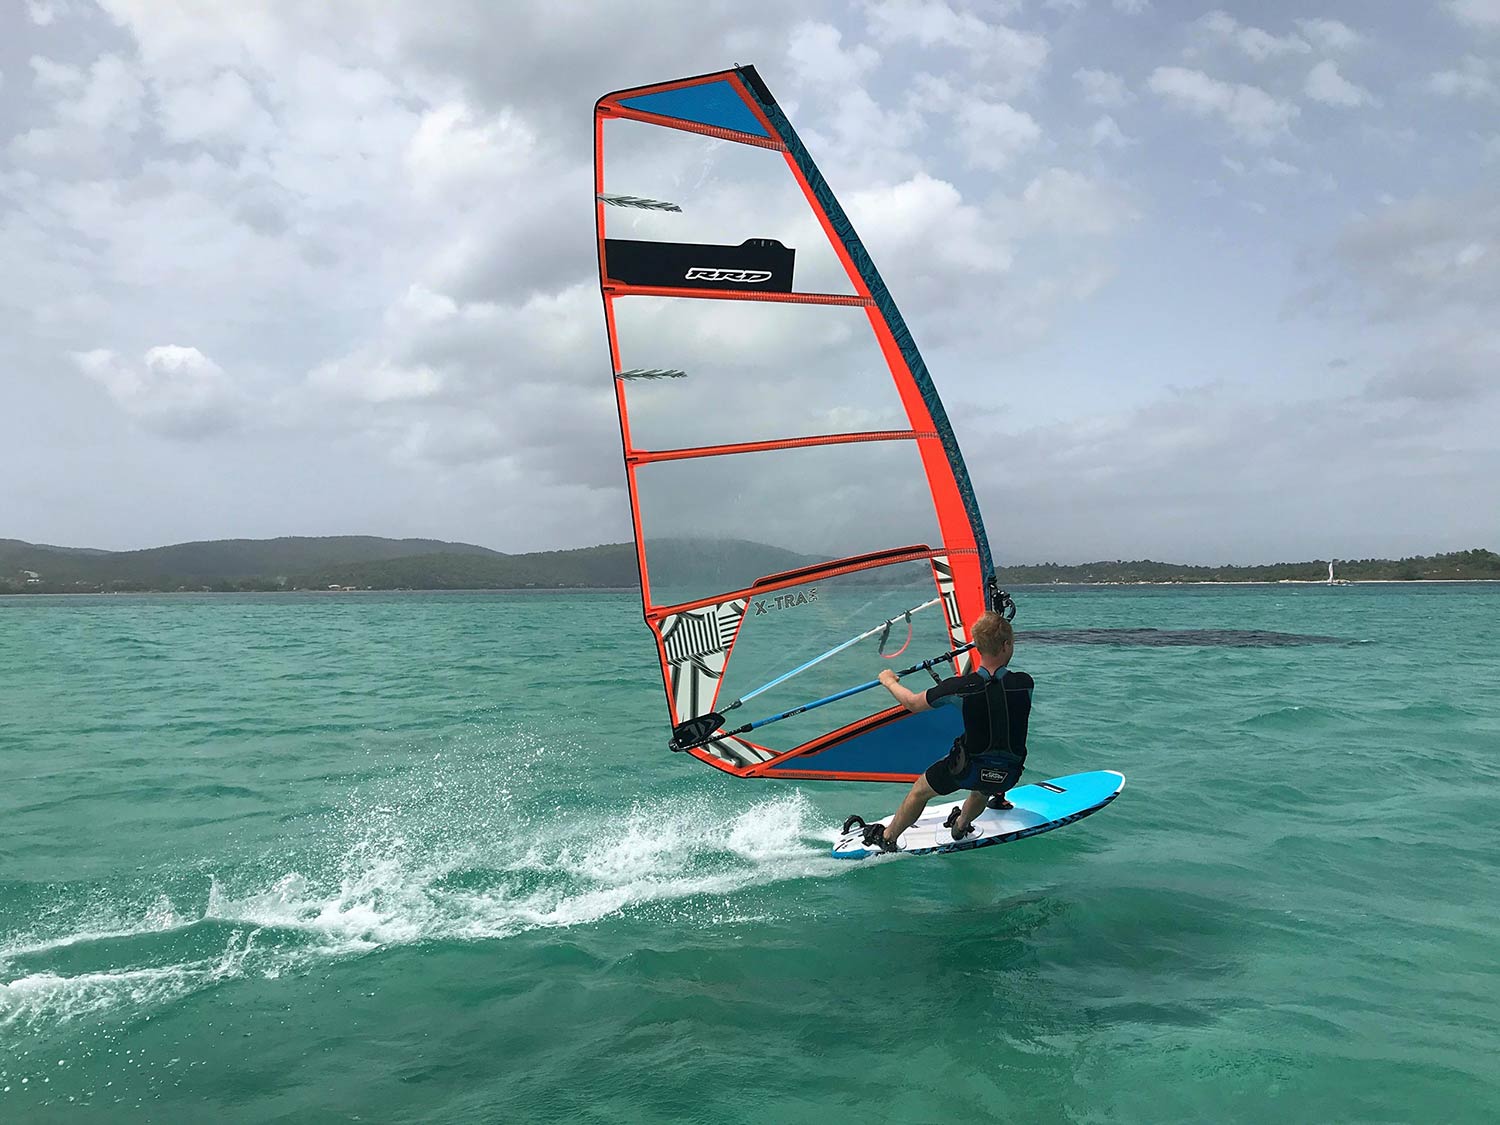 Person windsurfing on a windy day